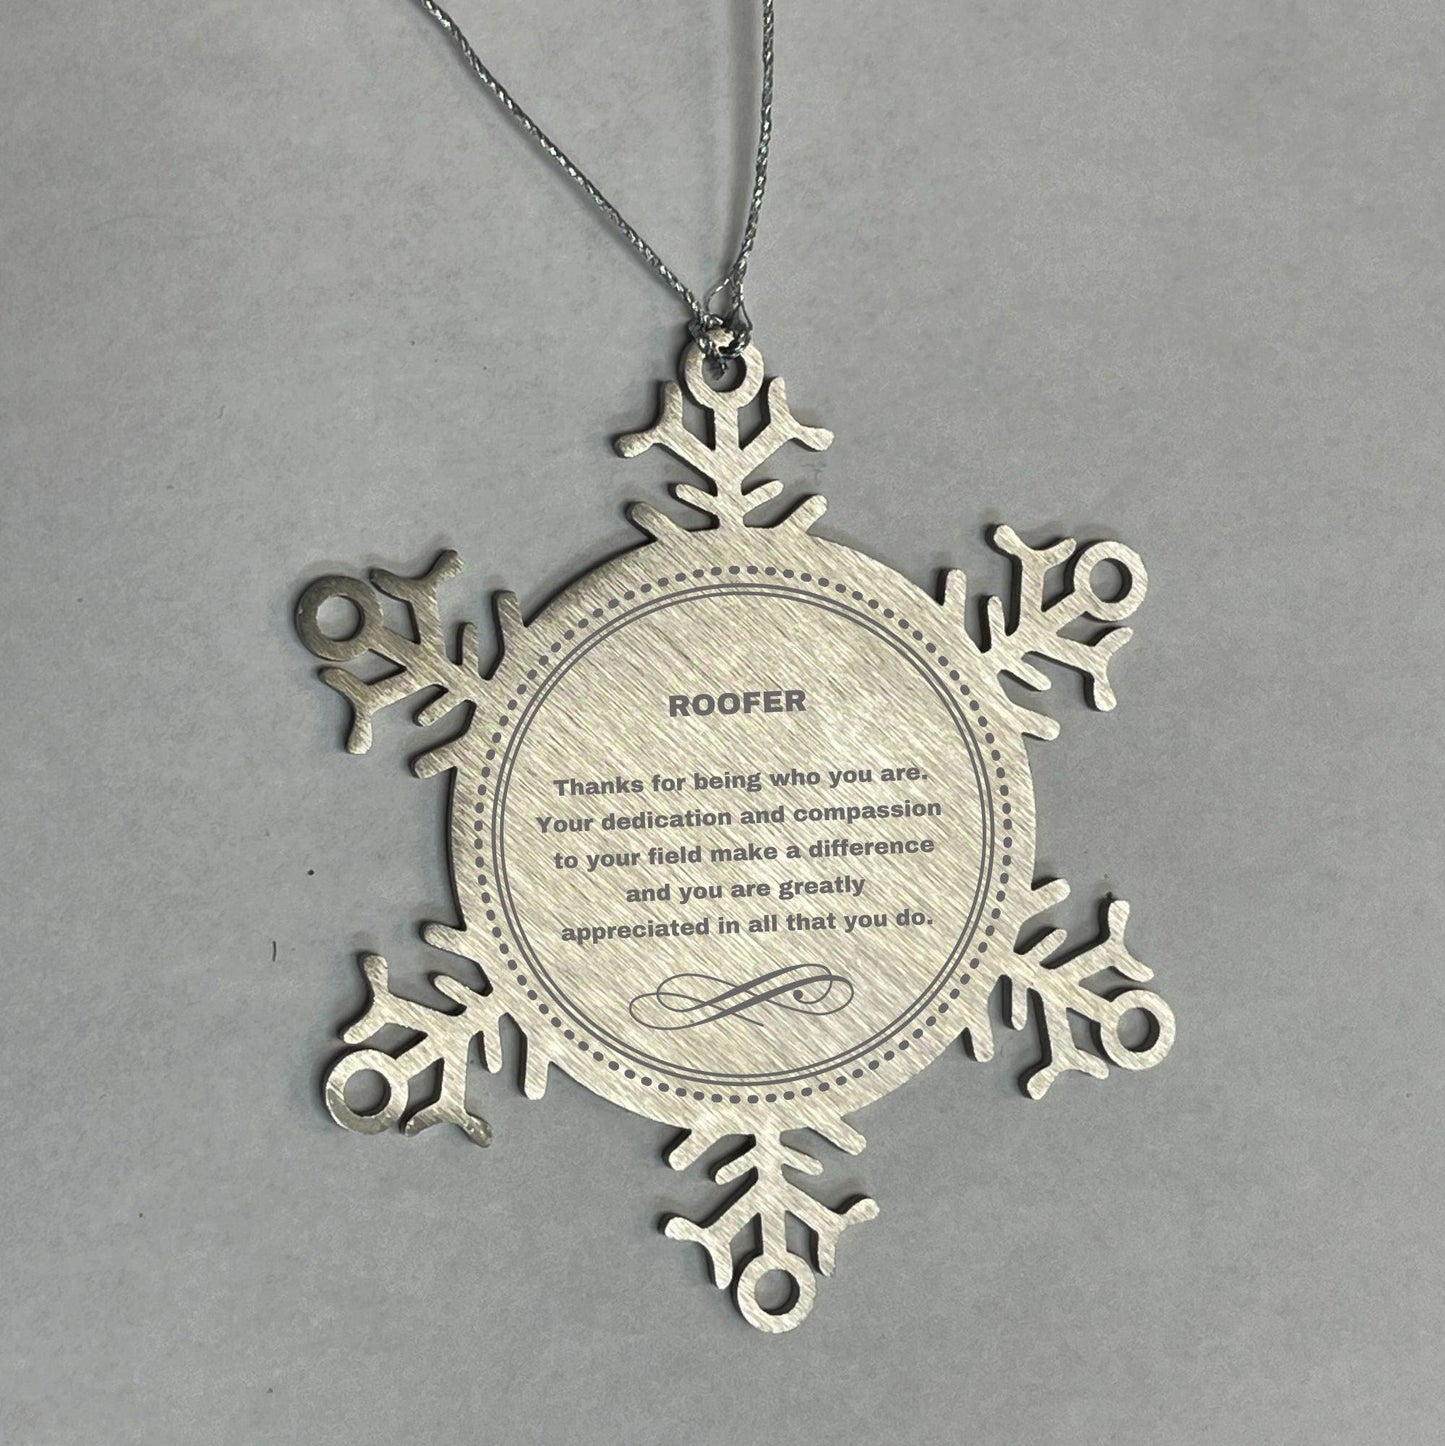 Roofer Snowflake Ornament - Thanks for being who you are - Birthday Christmas Jewelry Gifts Coworkers Colleague Boss - Mallard Moon Gift Shop